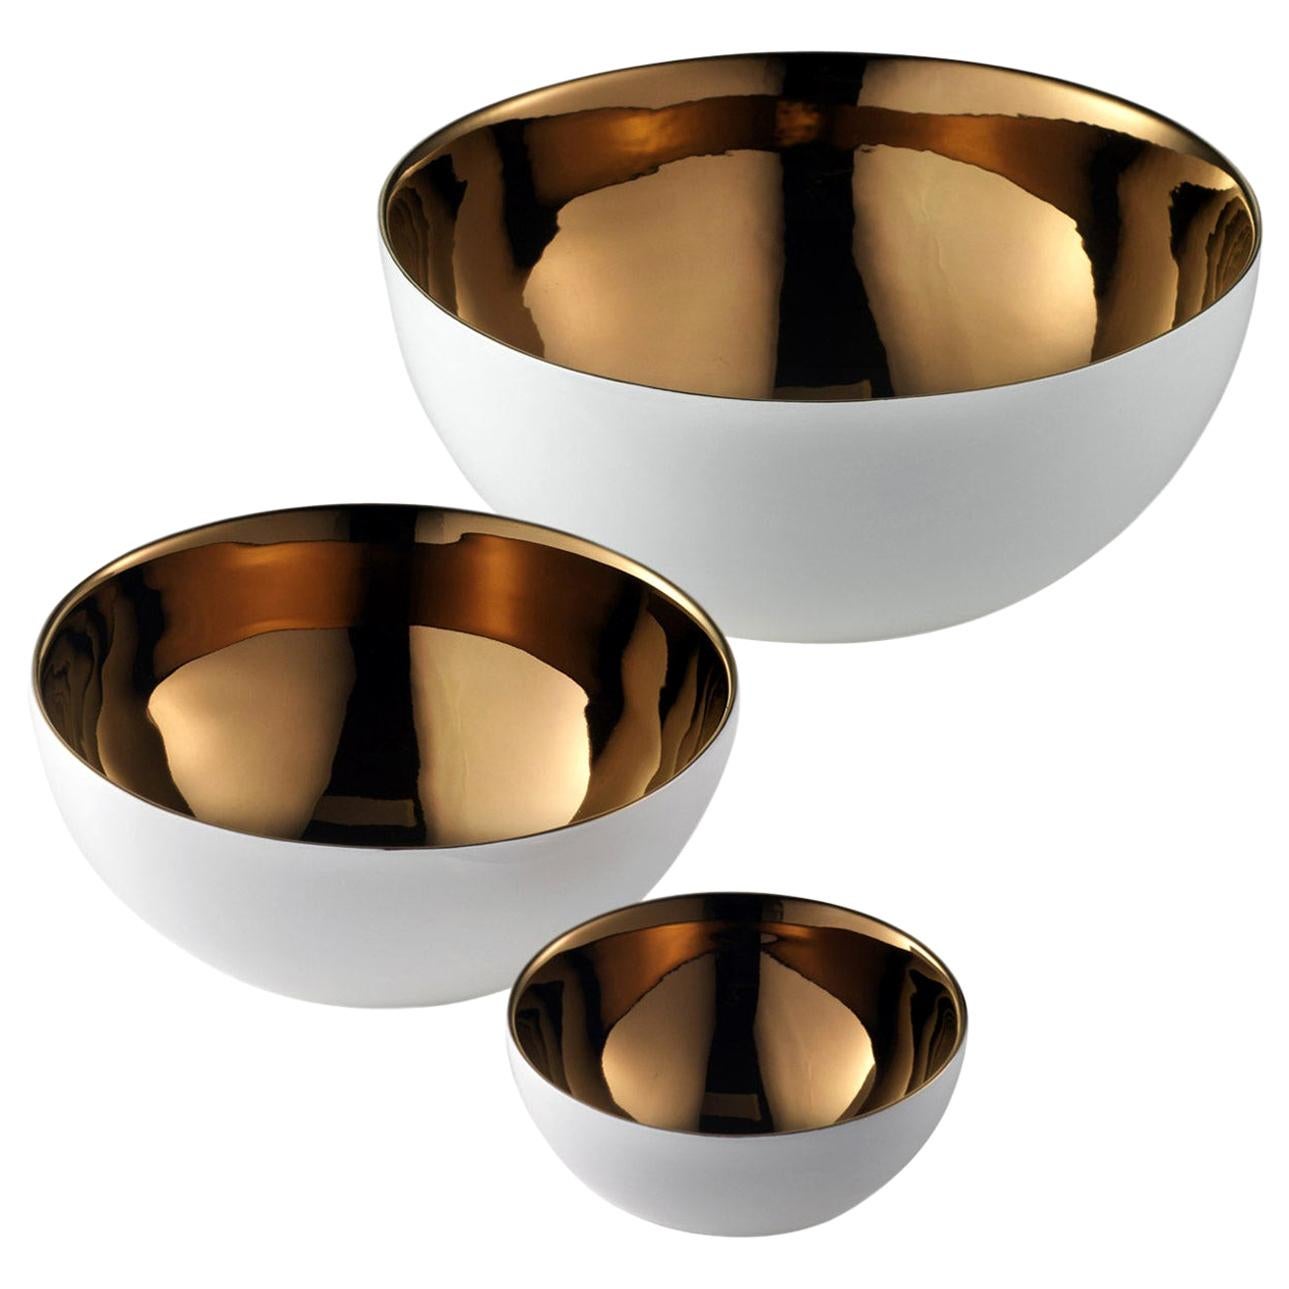 Set of 3 Ceramic Bowls "BOWLS" Handcrafted in White and Bronze by Gabriella B. 